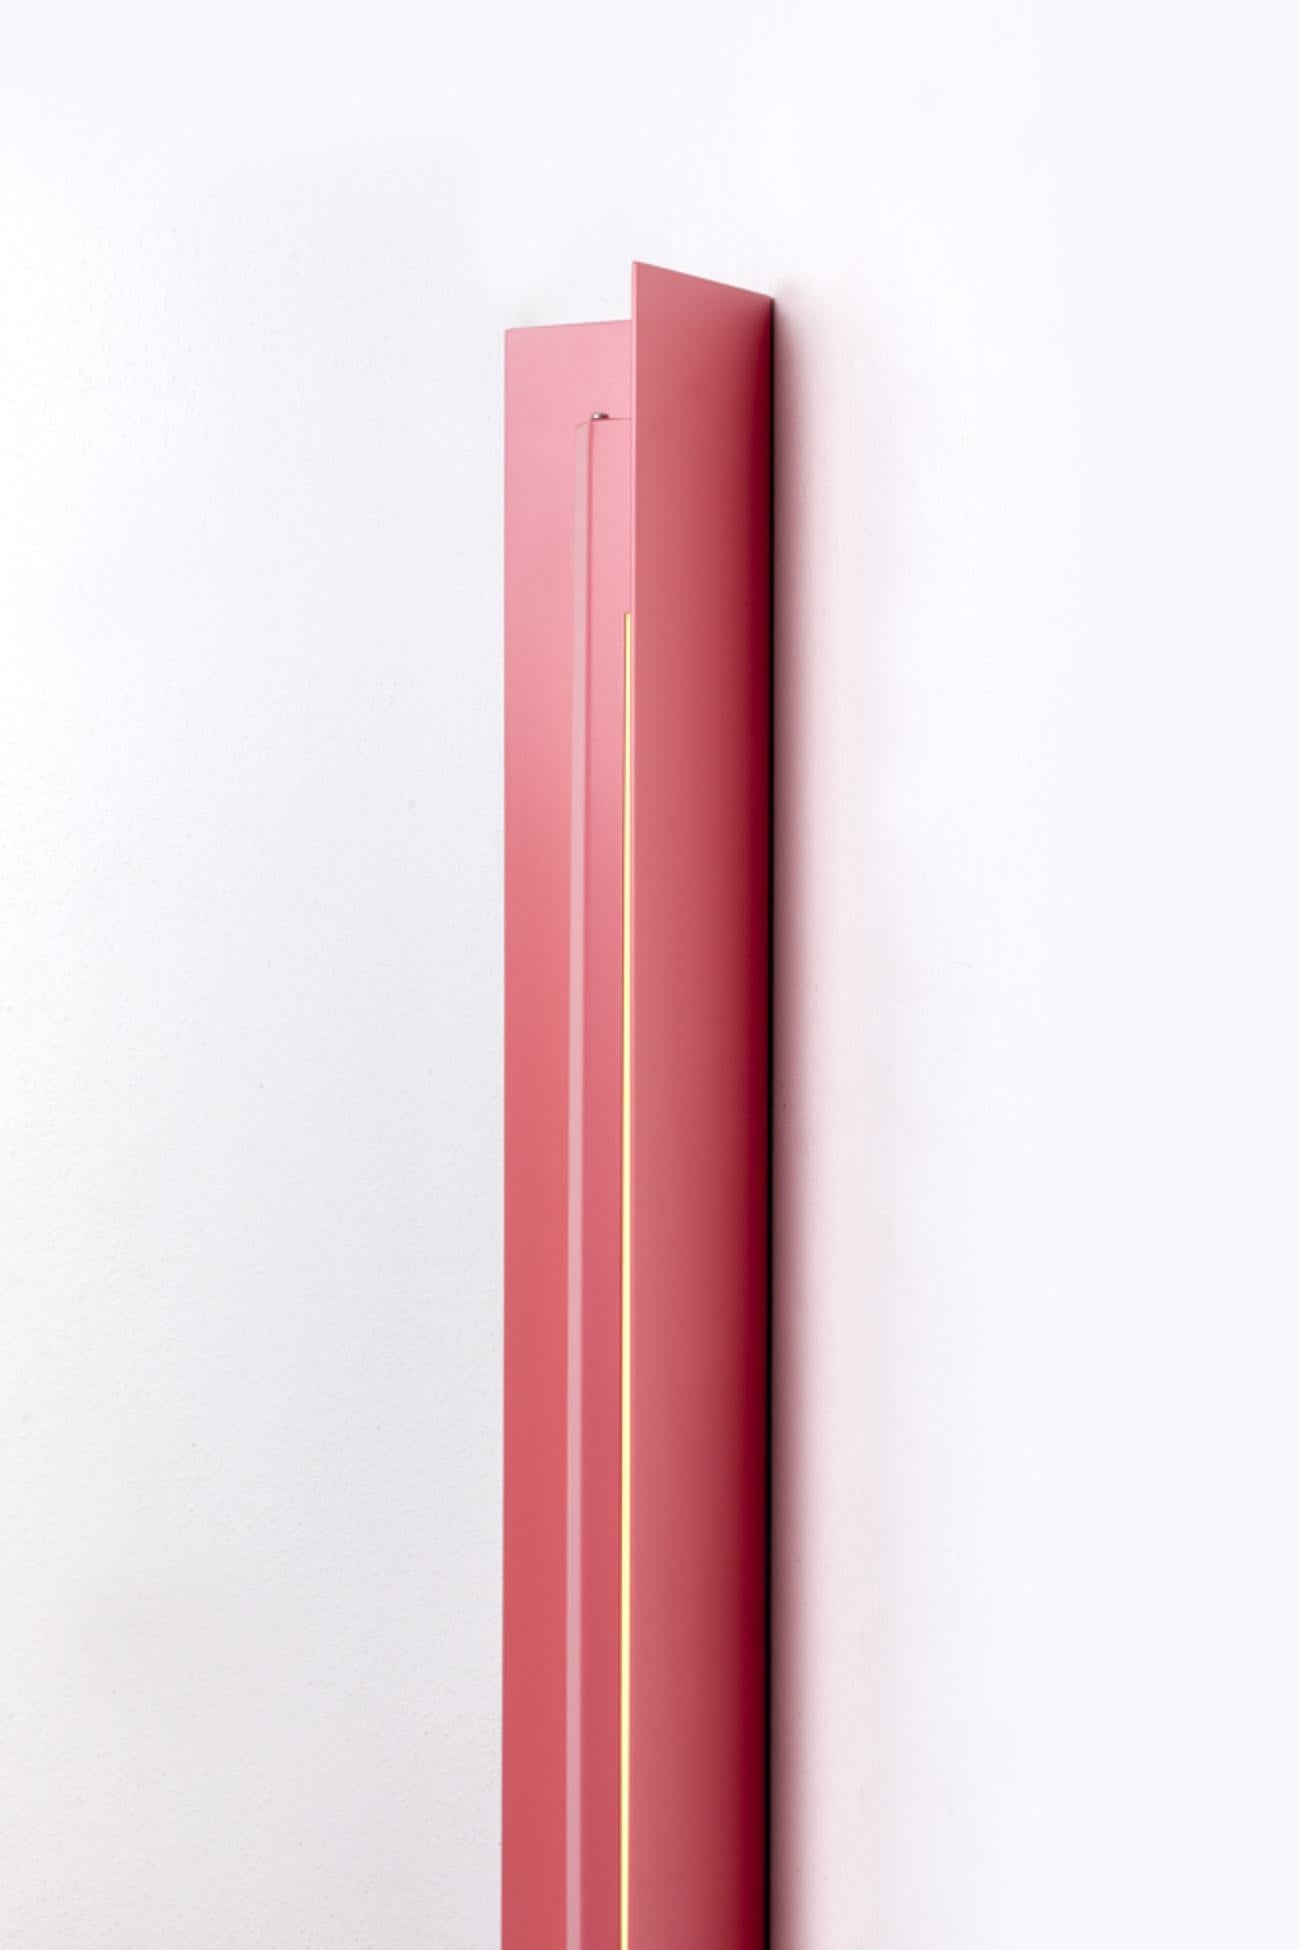 Large Misalliance Ral antique pink wall light by Lexavala
Dimensions: D 16 x W 130 x H 8 cm
Materials: powder coated aluminium.

There are two lenghts of socket covers, extending over the LED. Two short are to be found in Suspended and Surface,